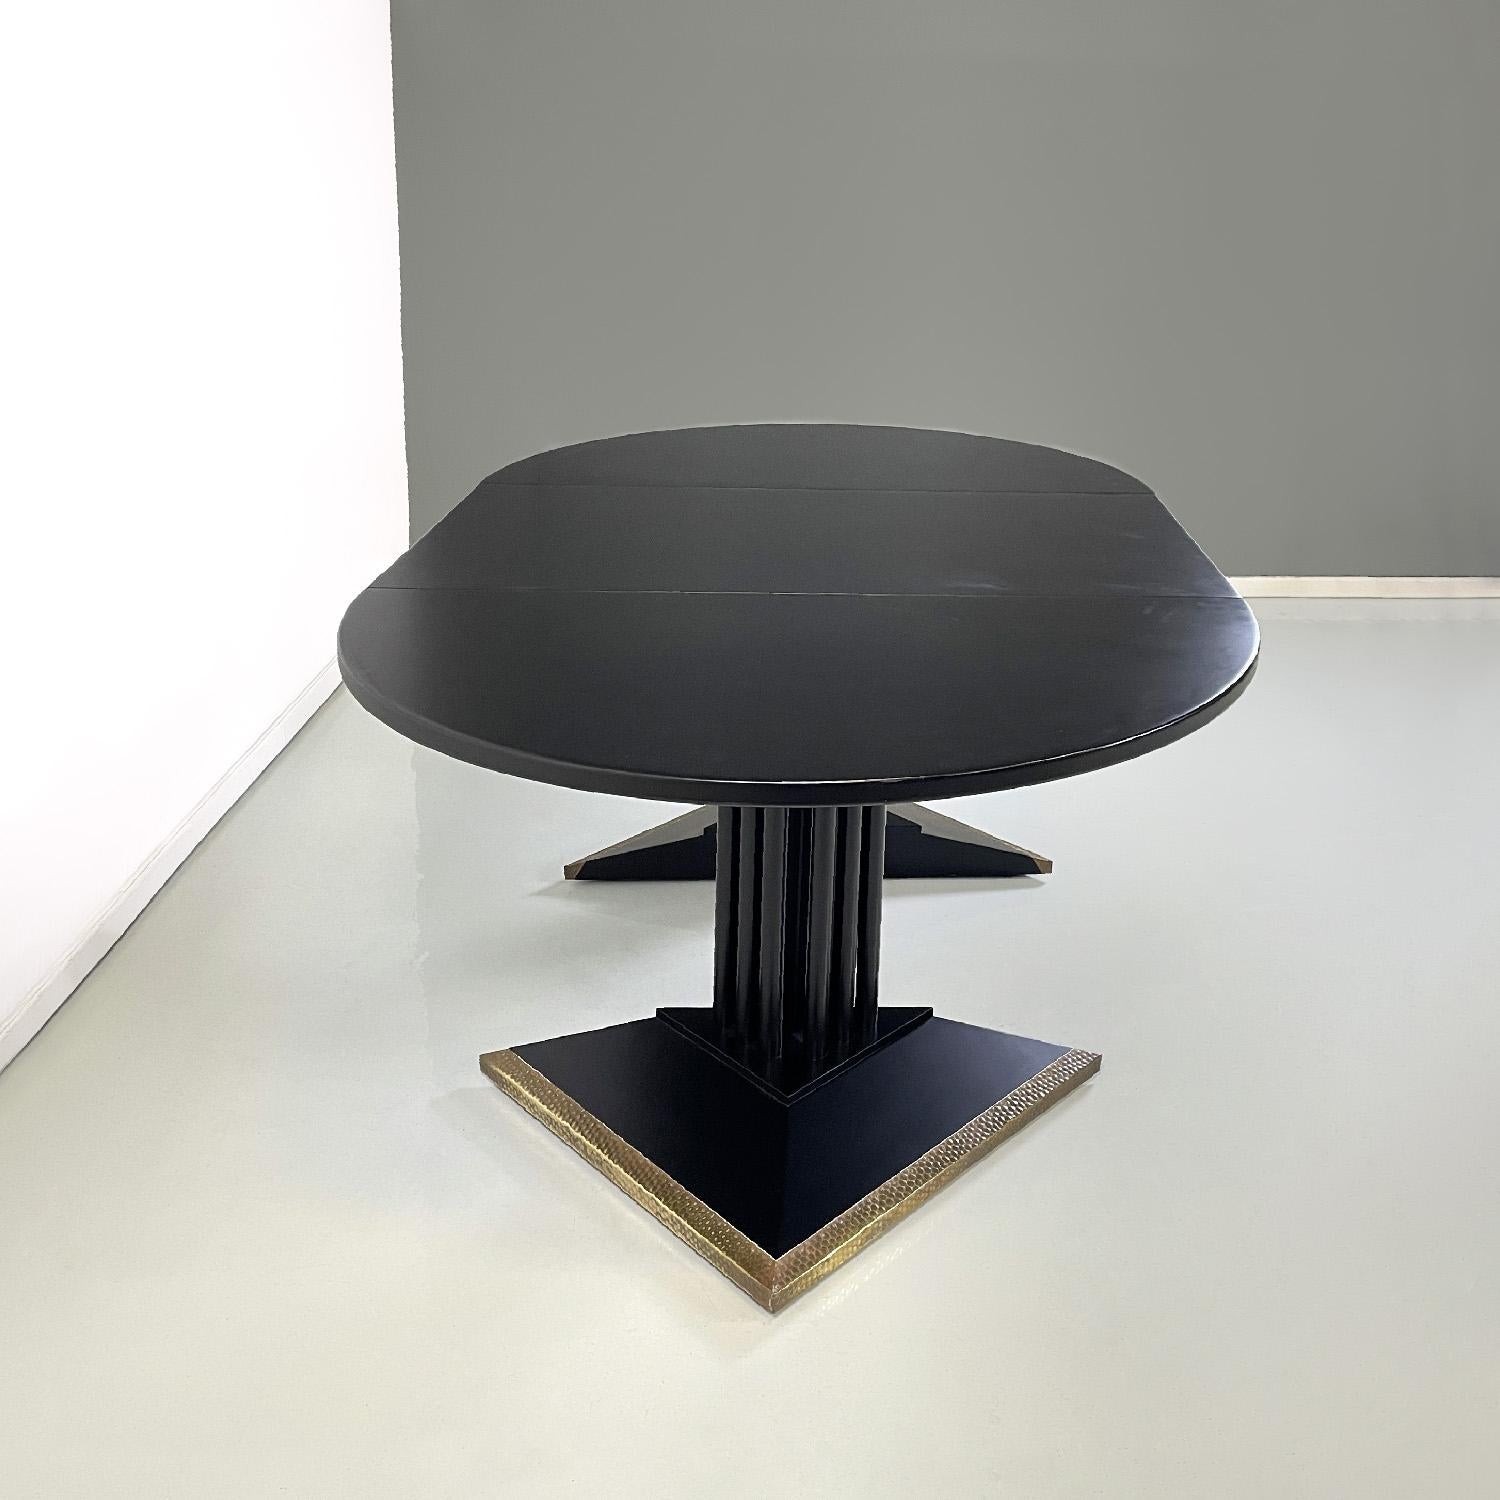 Italian modern extendable black and gold dining table by Thonet, 1990s For Sale 1